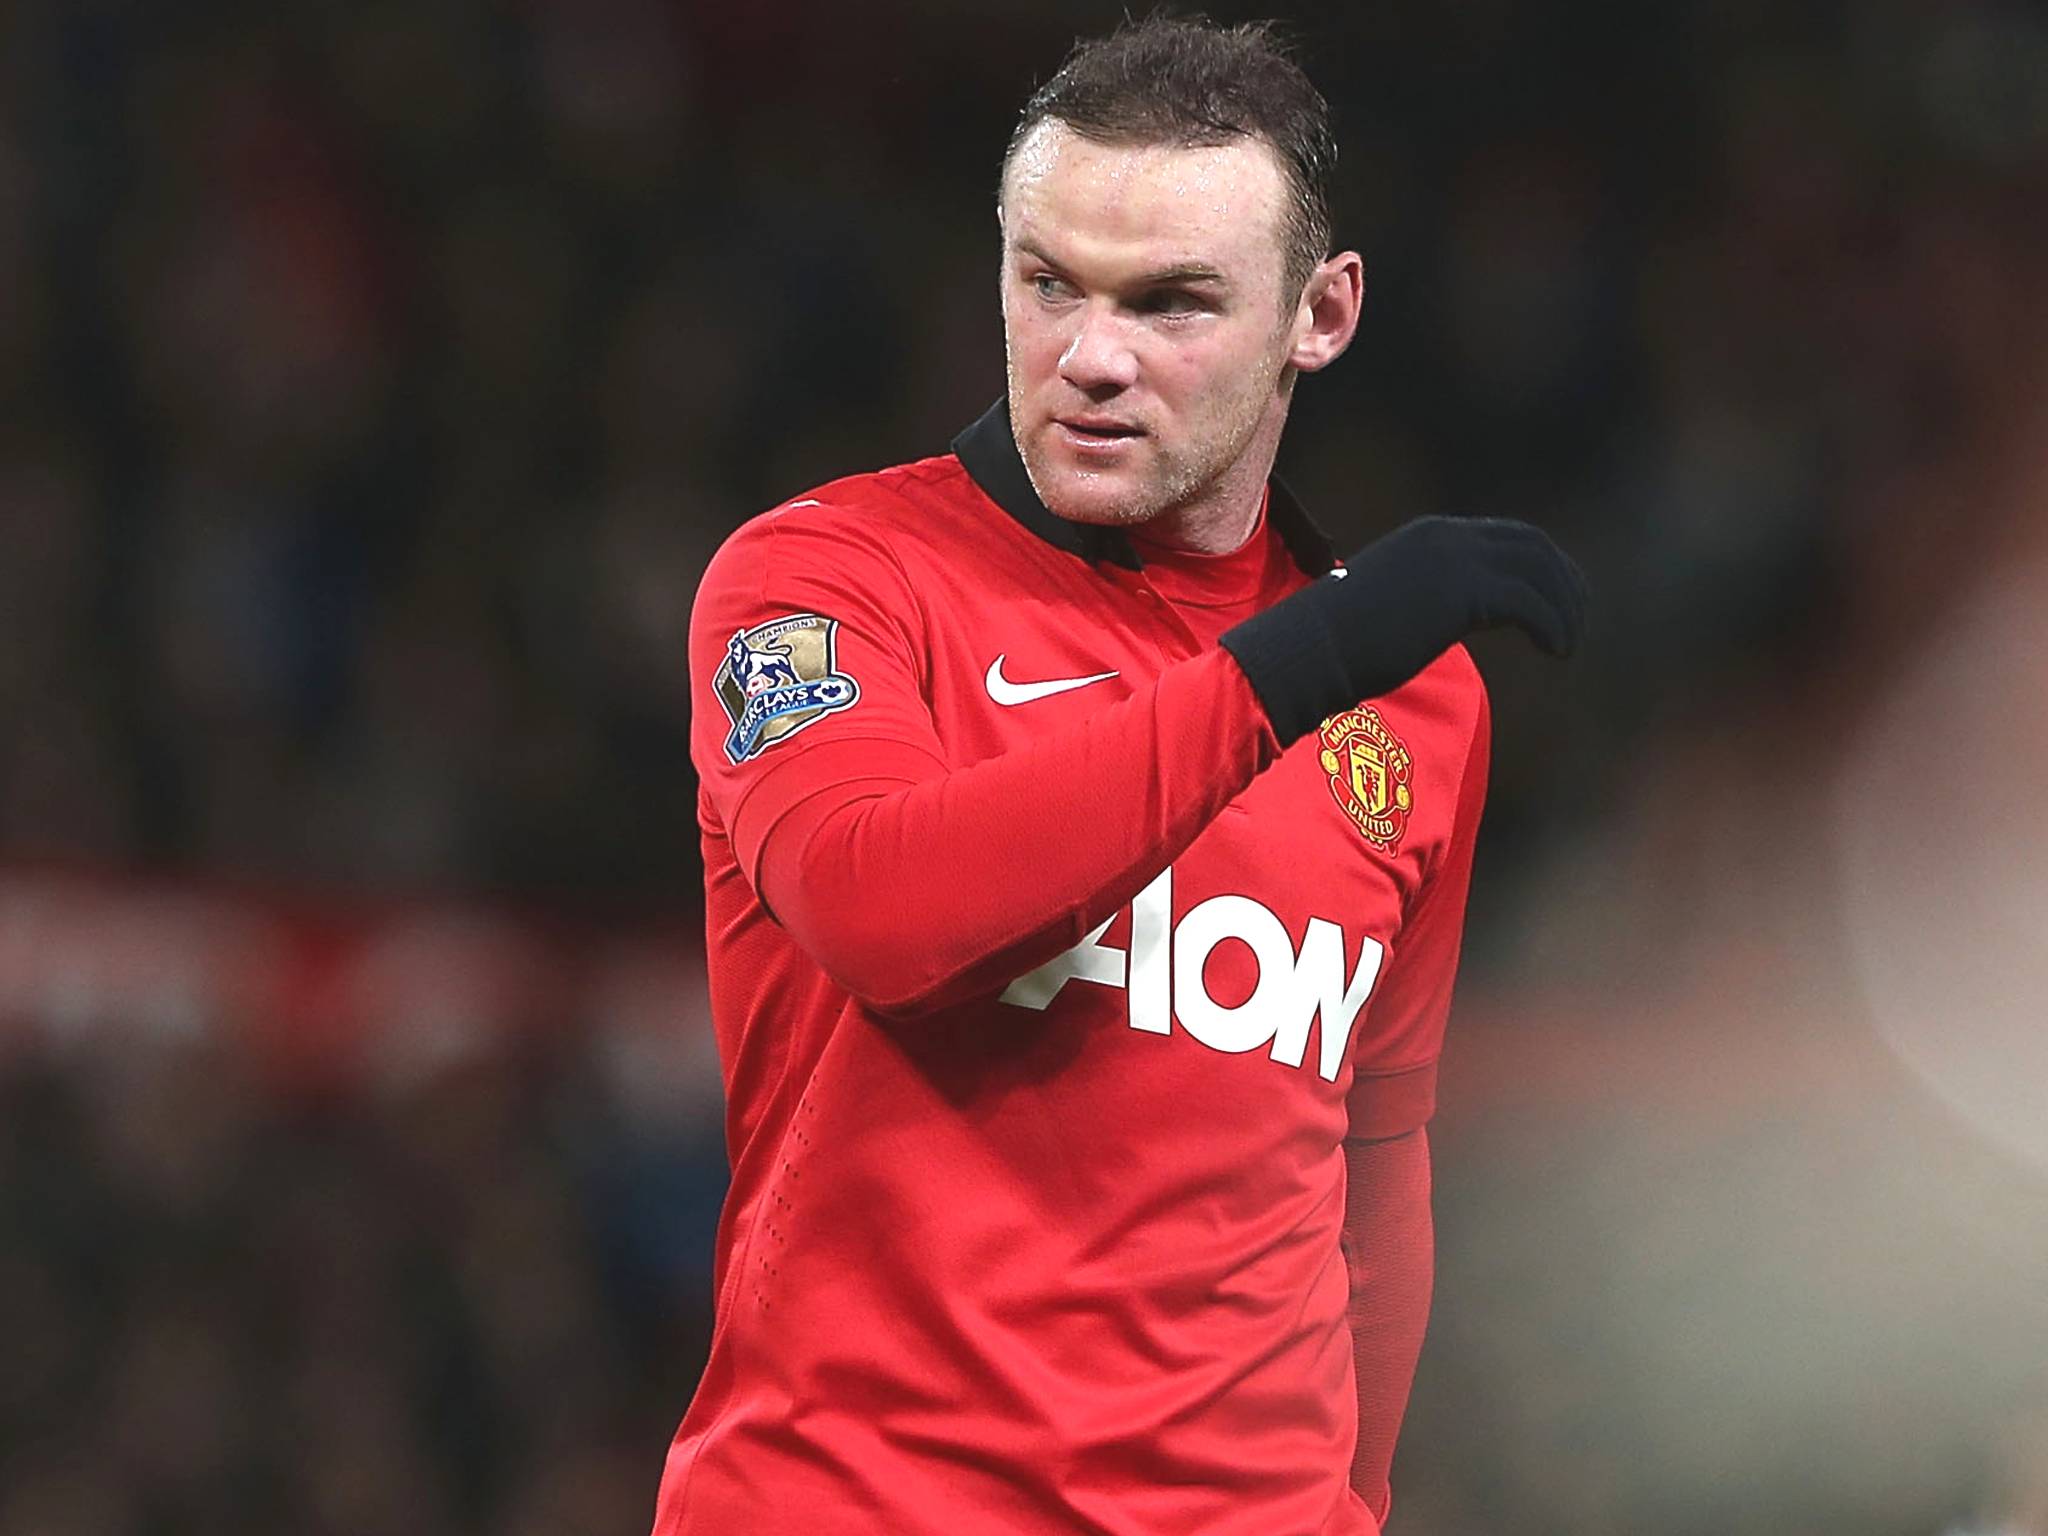 Real Madrid want to take advantage of Wayne Rooney’s desire to play in the Champions League